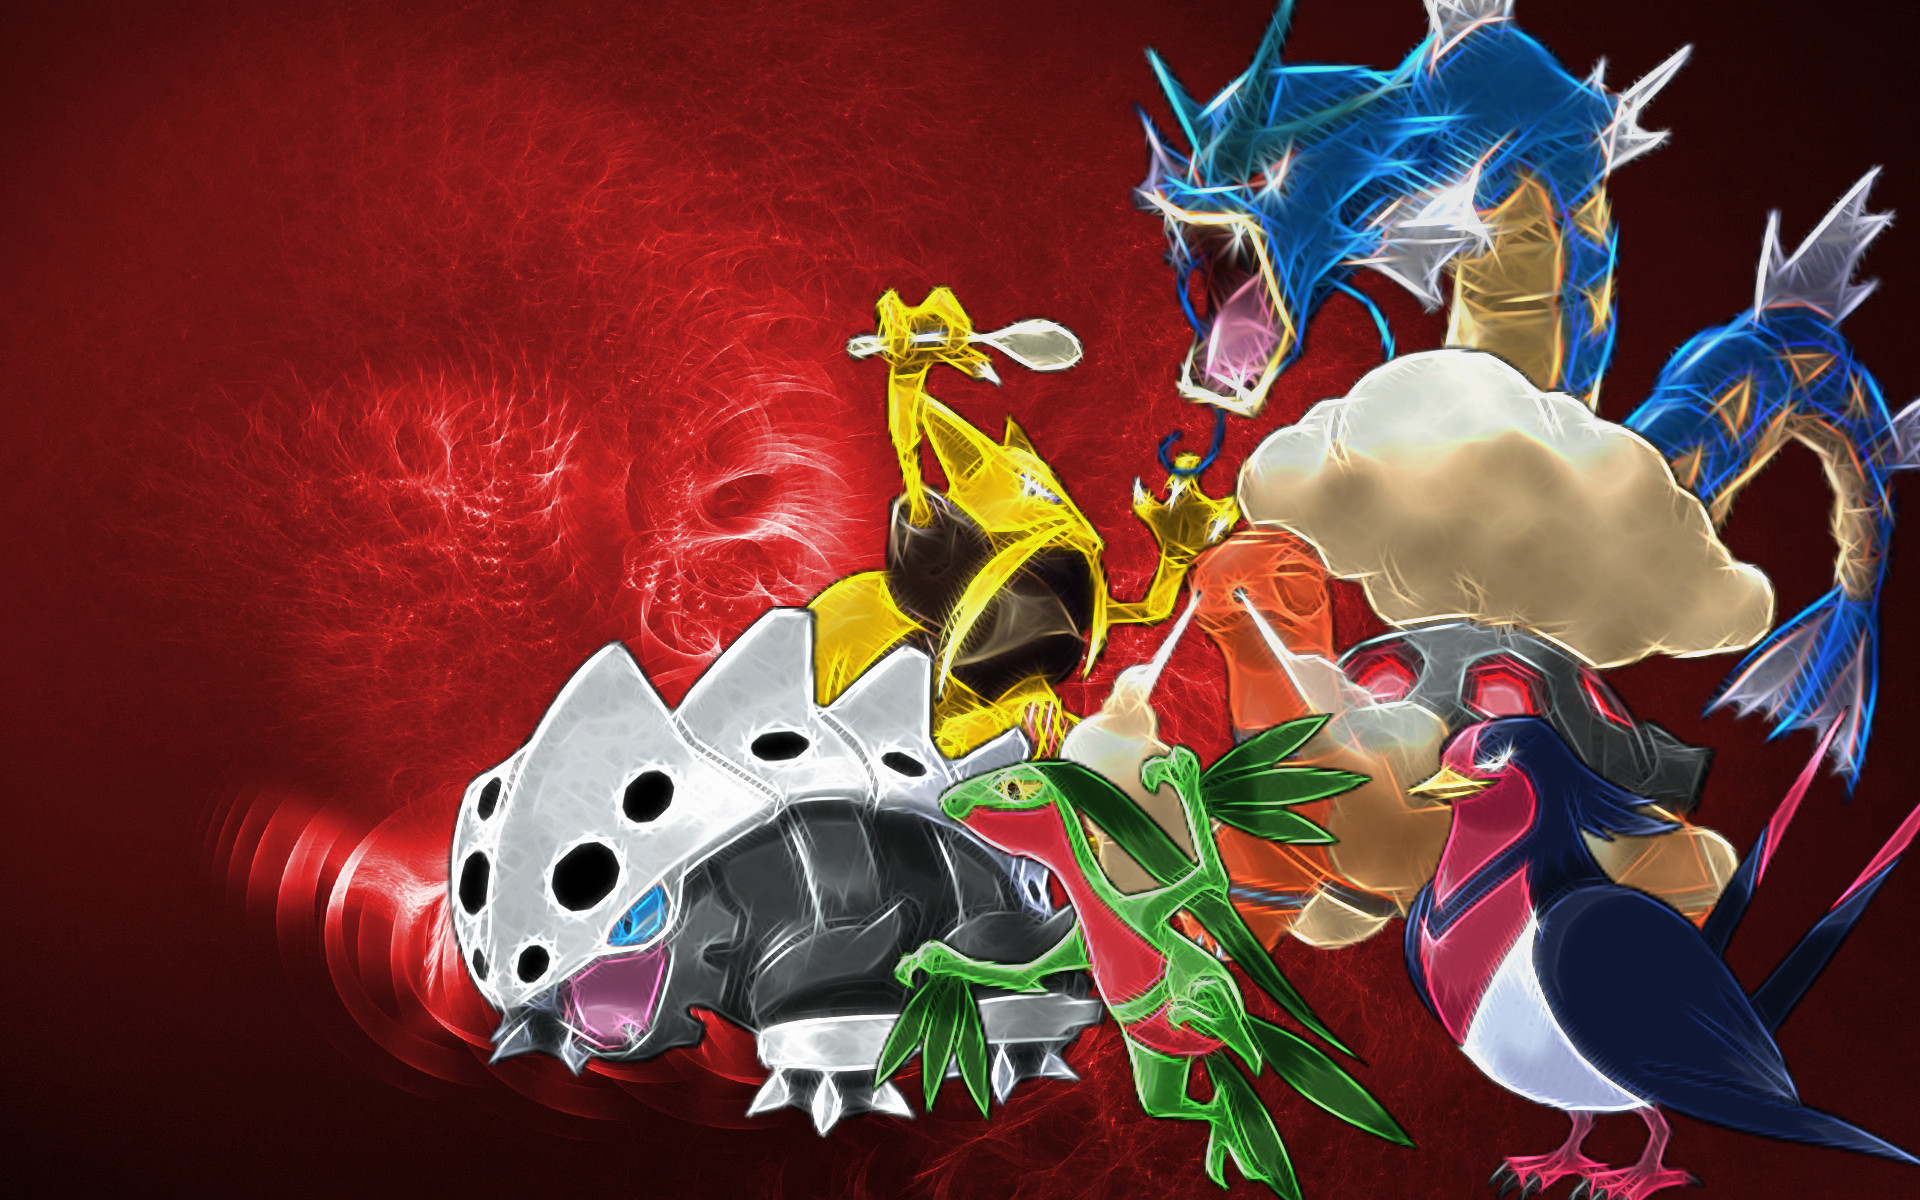 Red Pokemon Trainer Wallpapers - Wallpaper Cave